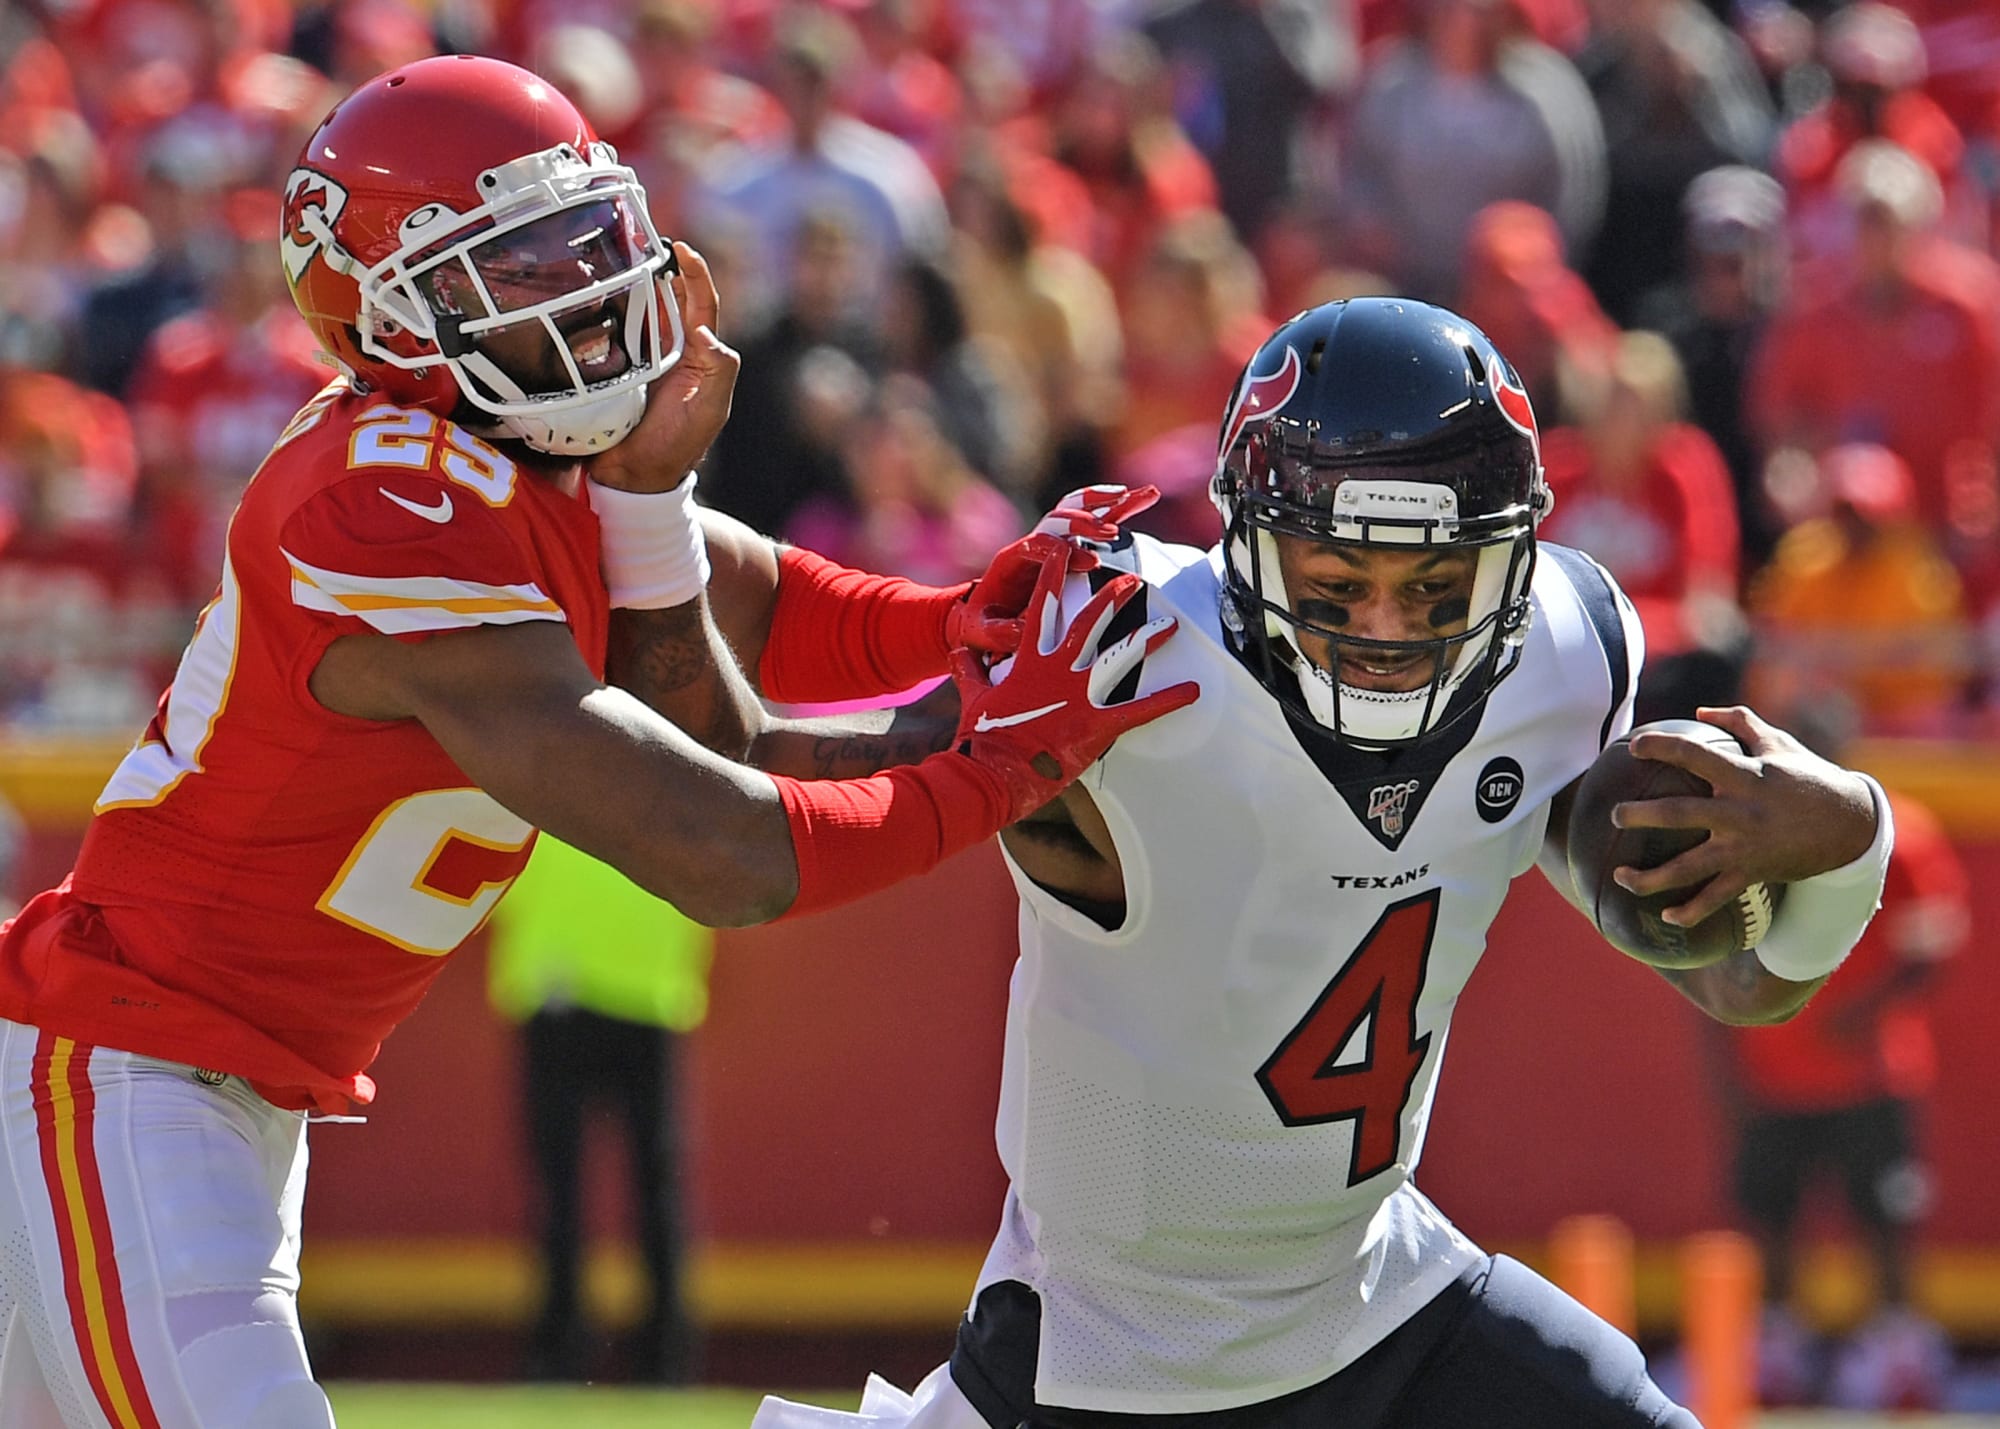 Kansas City Chiefs look downright pitiful in loss to the Houston Texans